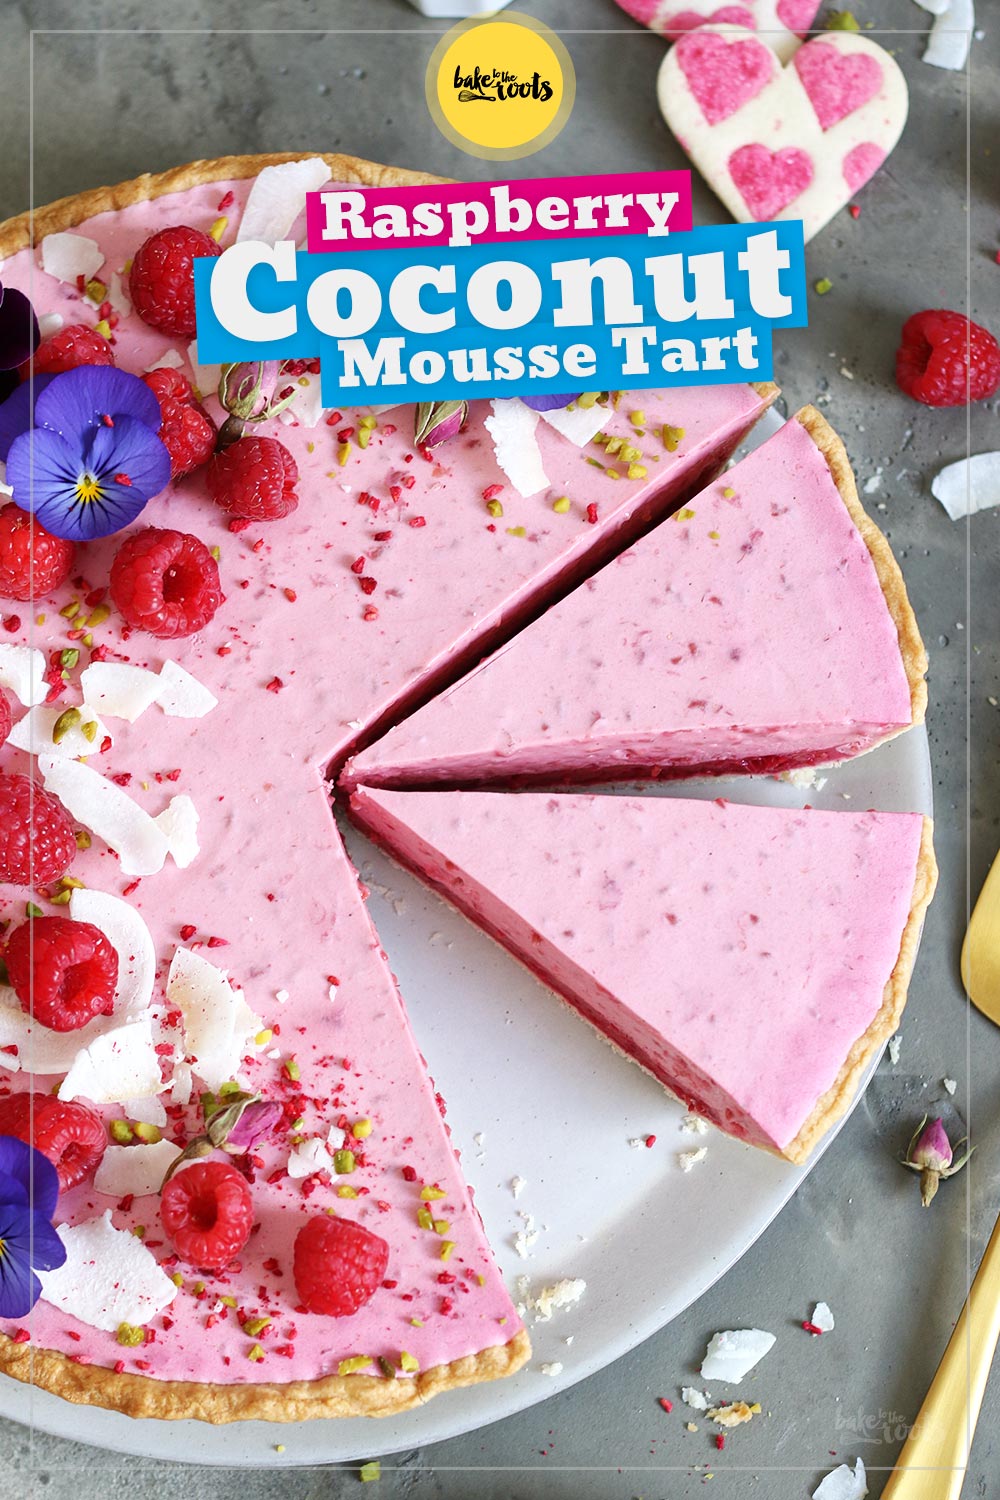 Raspberry Coconut Mousse Tart | Bake to the roots